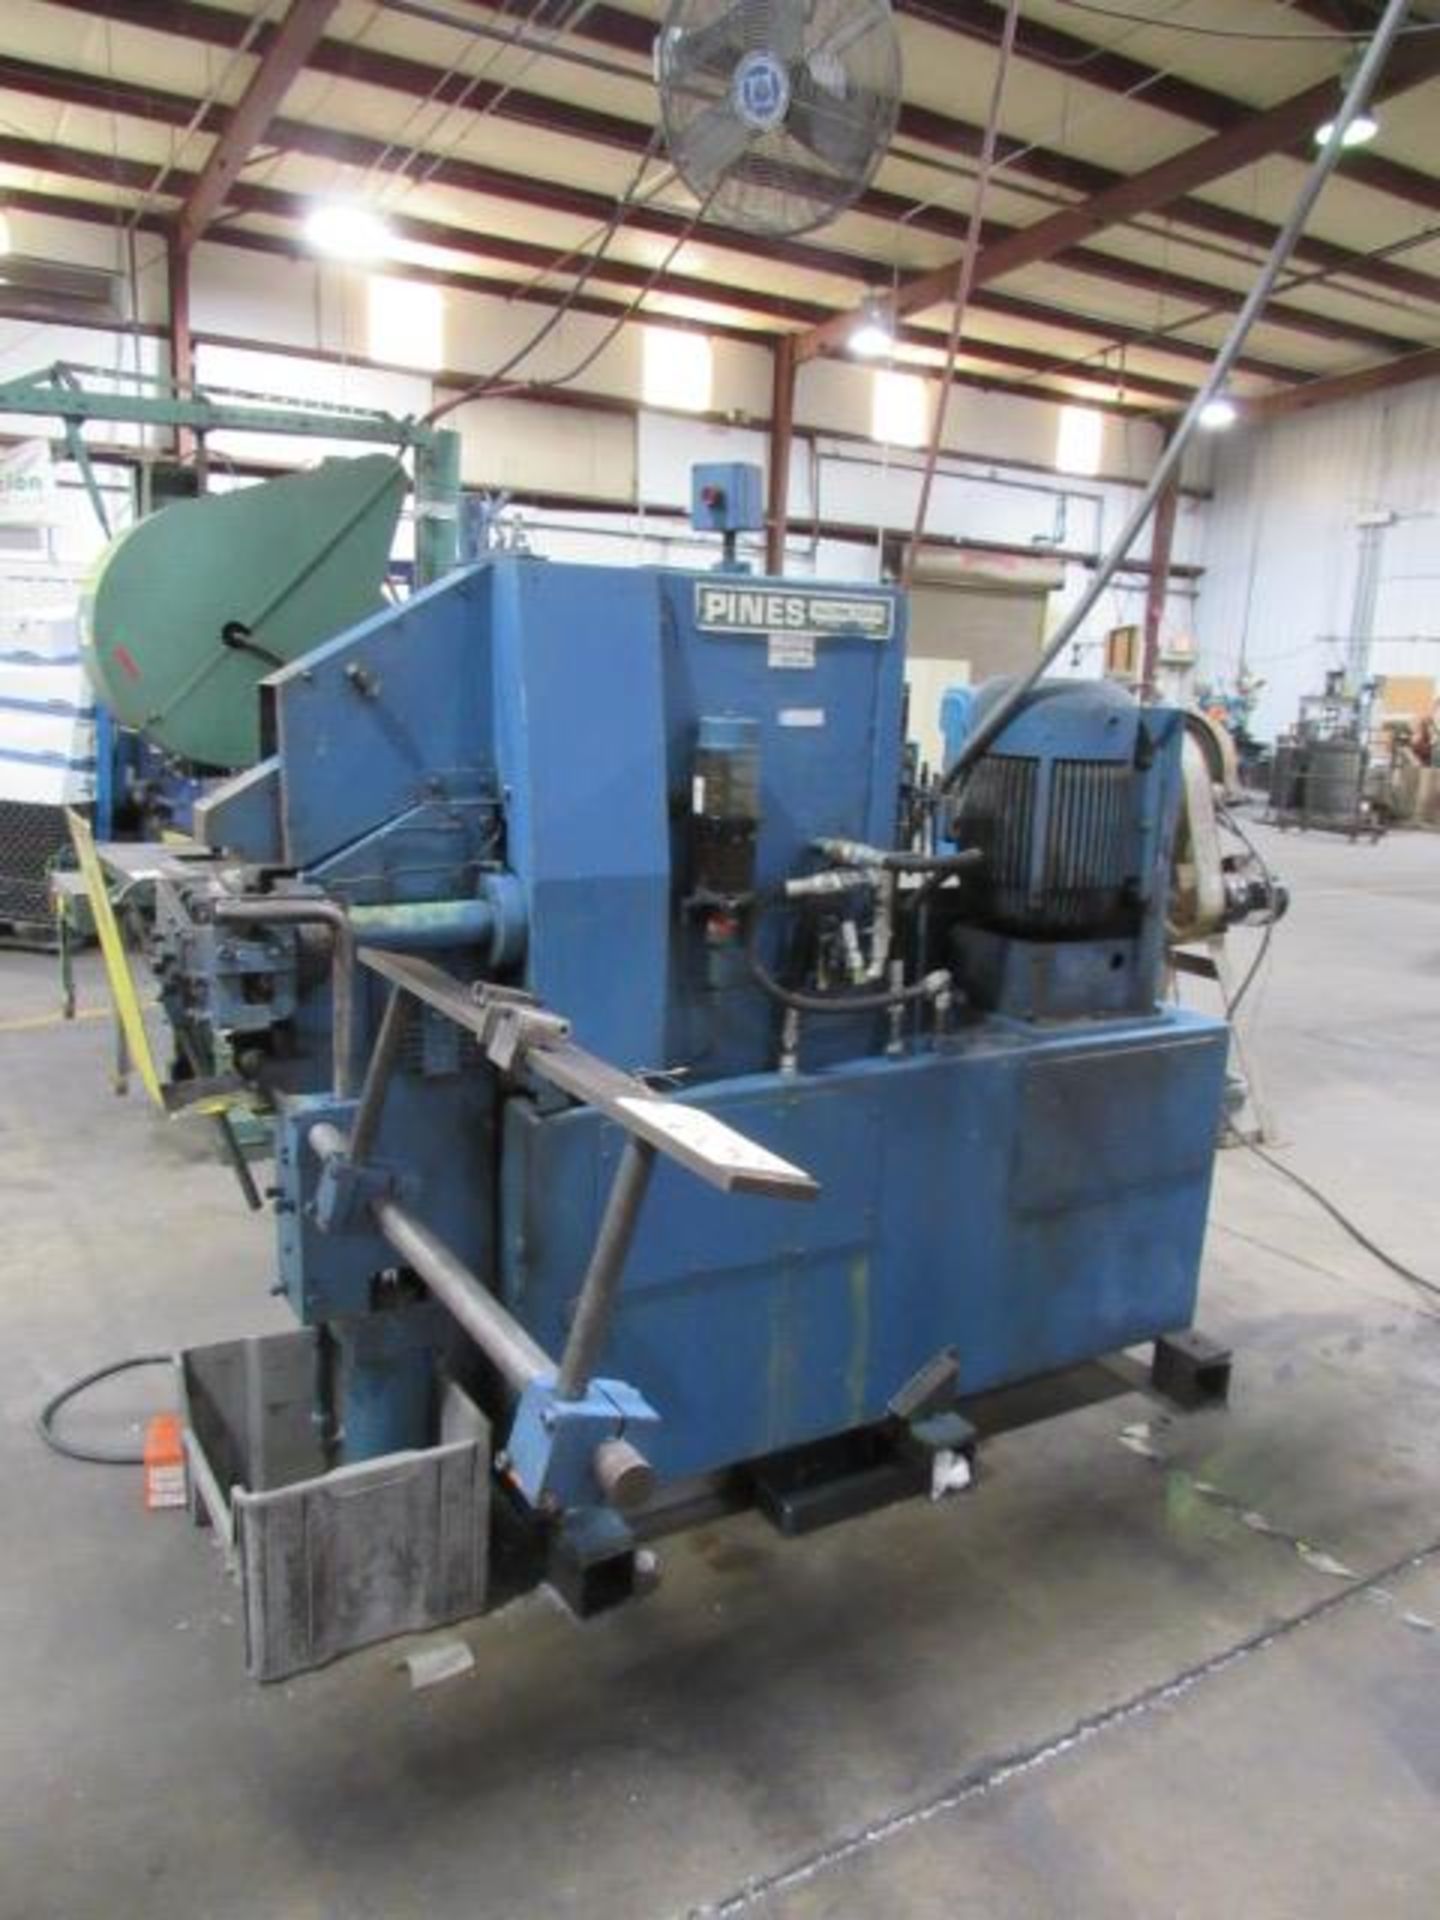 Pines No.M-93232 Hydraulic Vertical Tube Bender, sn:44361-79234 - Image 3 of 5